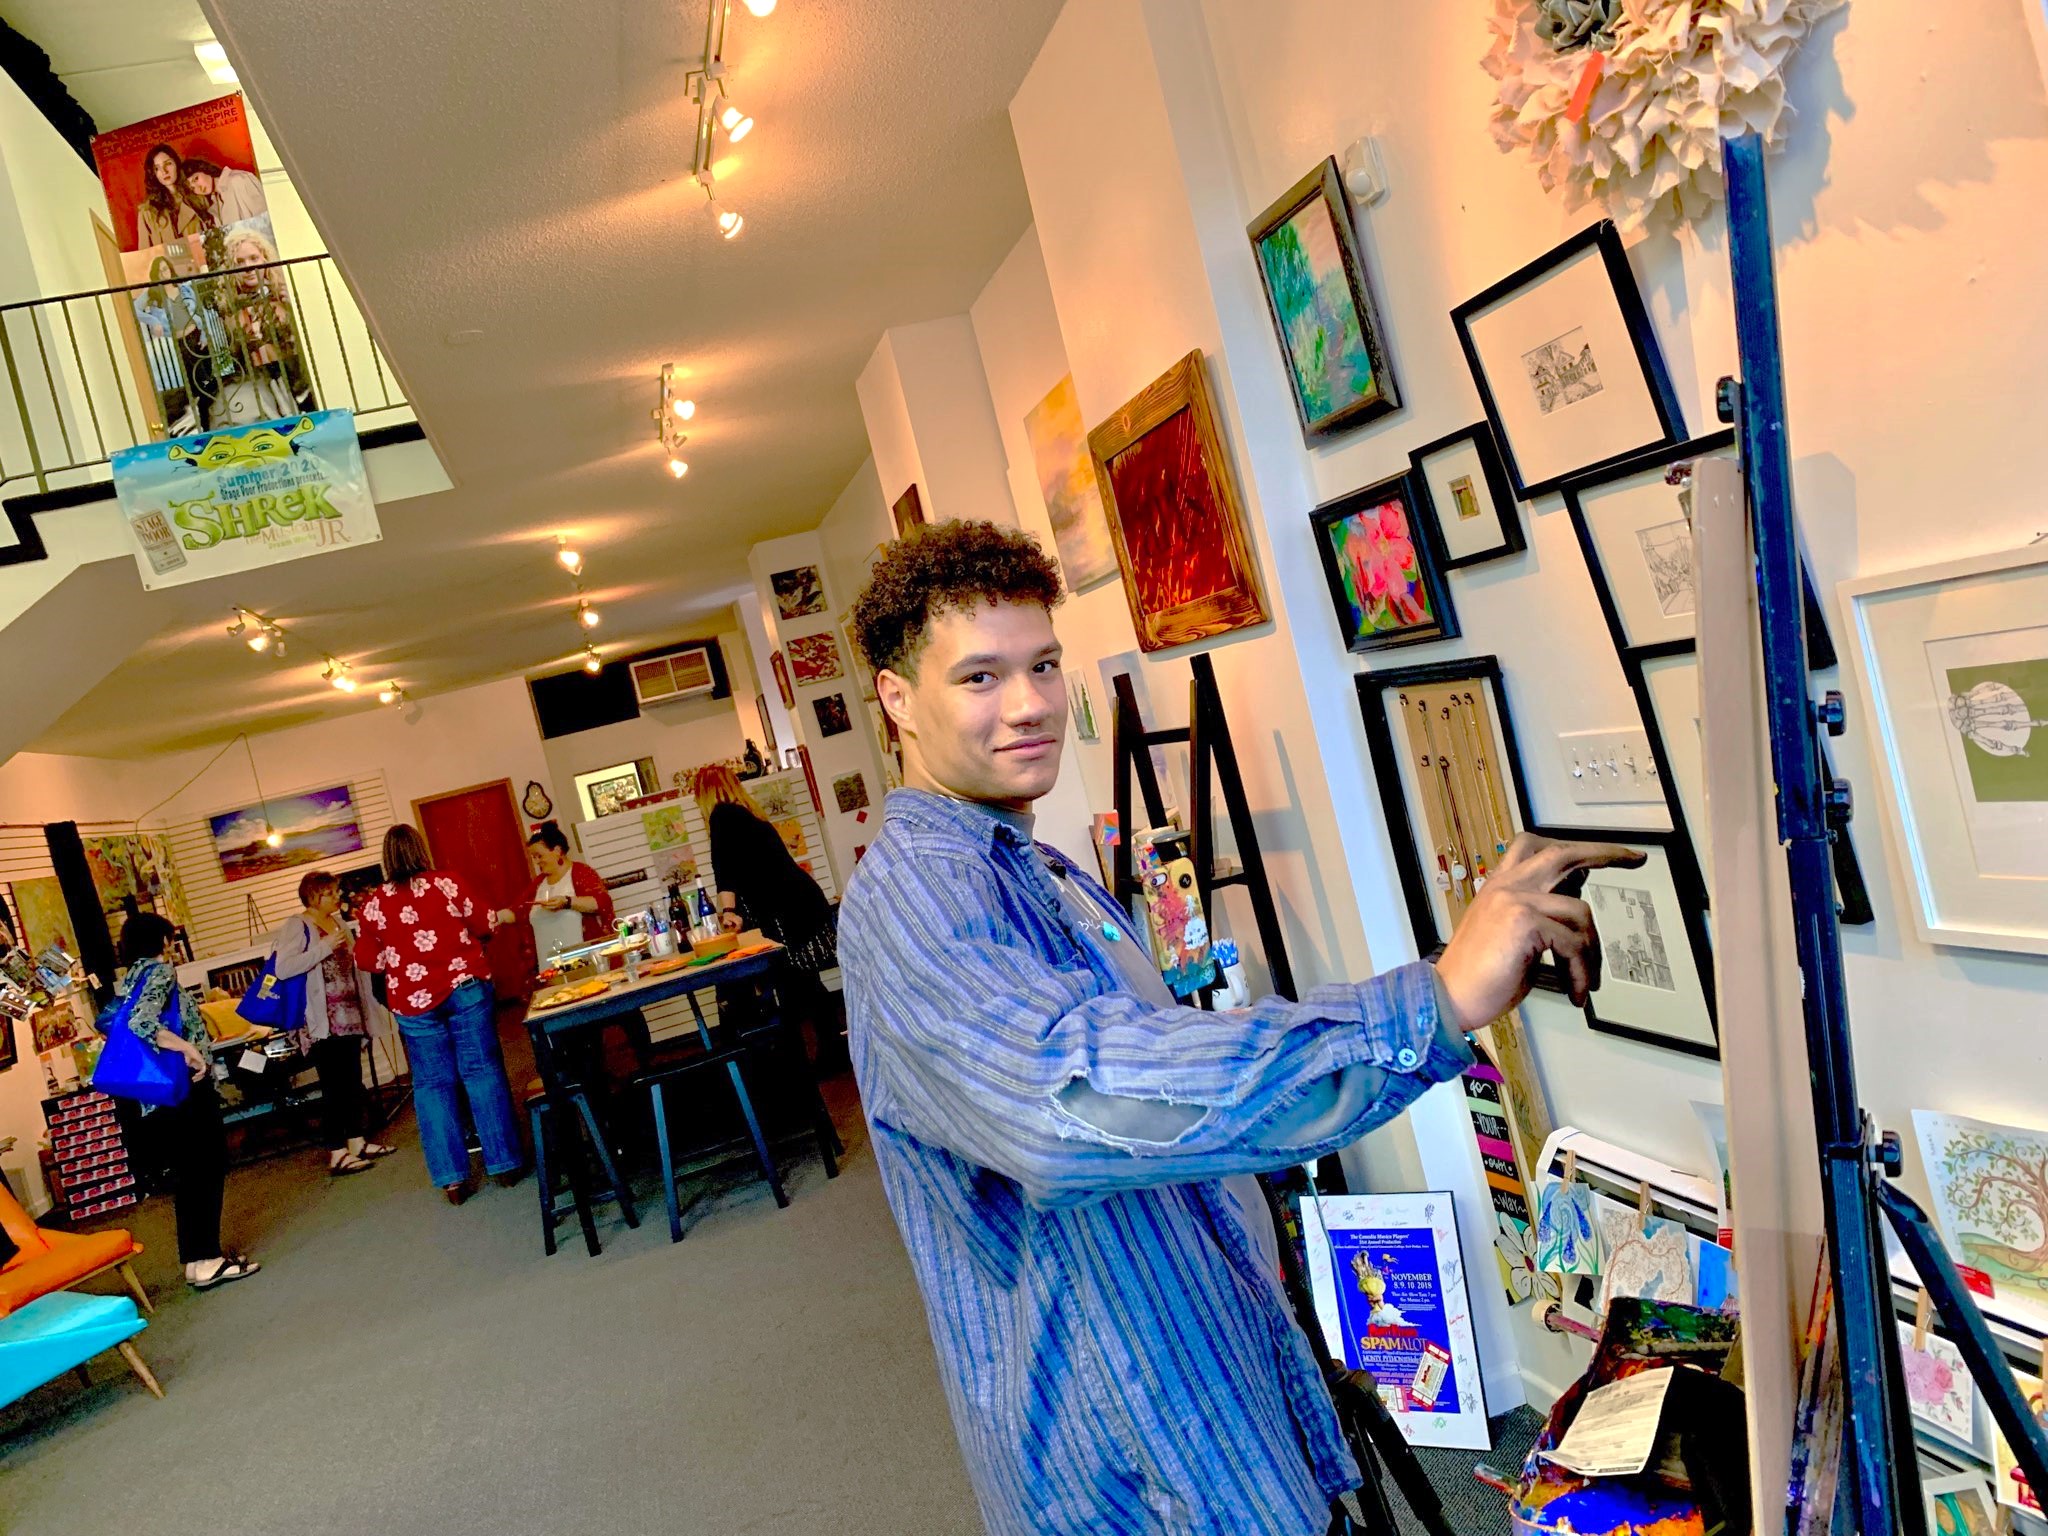 A young, male artist stands at his easel doing charcoal art. Fine art hangs on the walls around him and a group of ladies in the background chat while crafting.